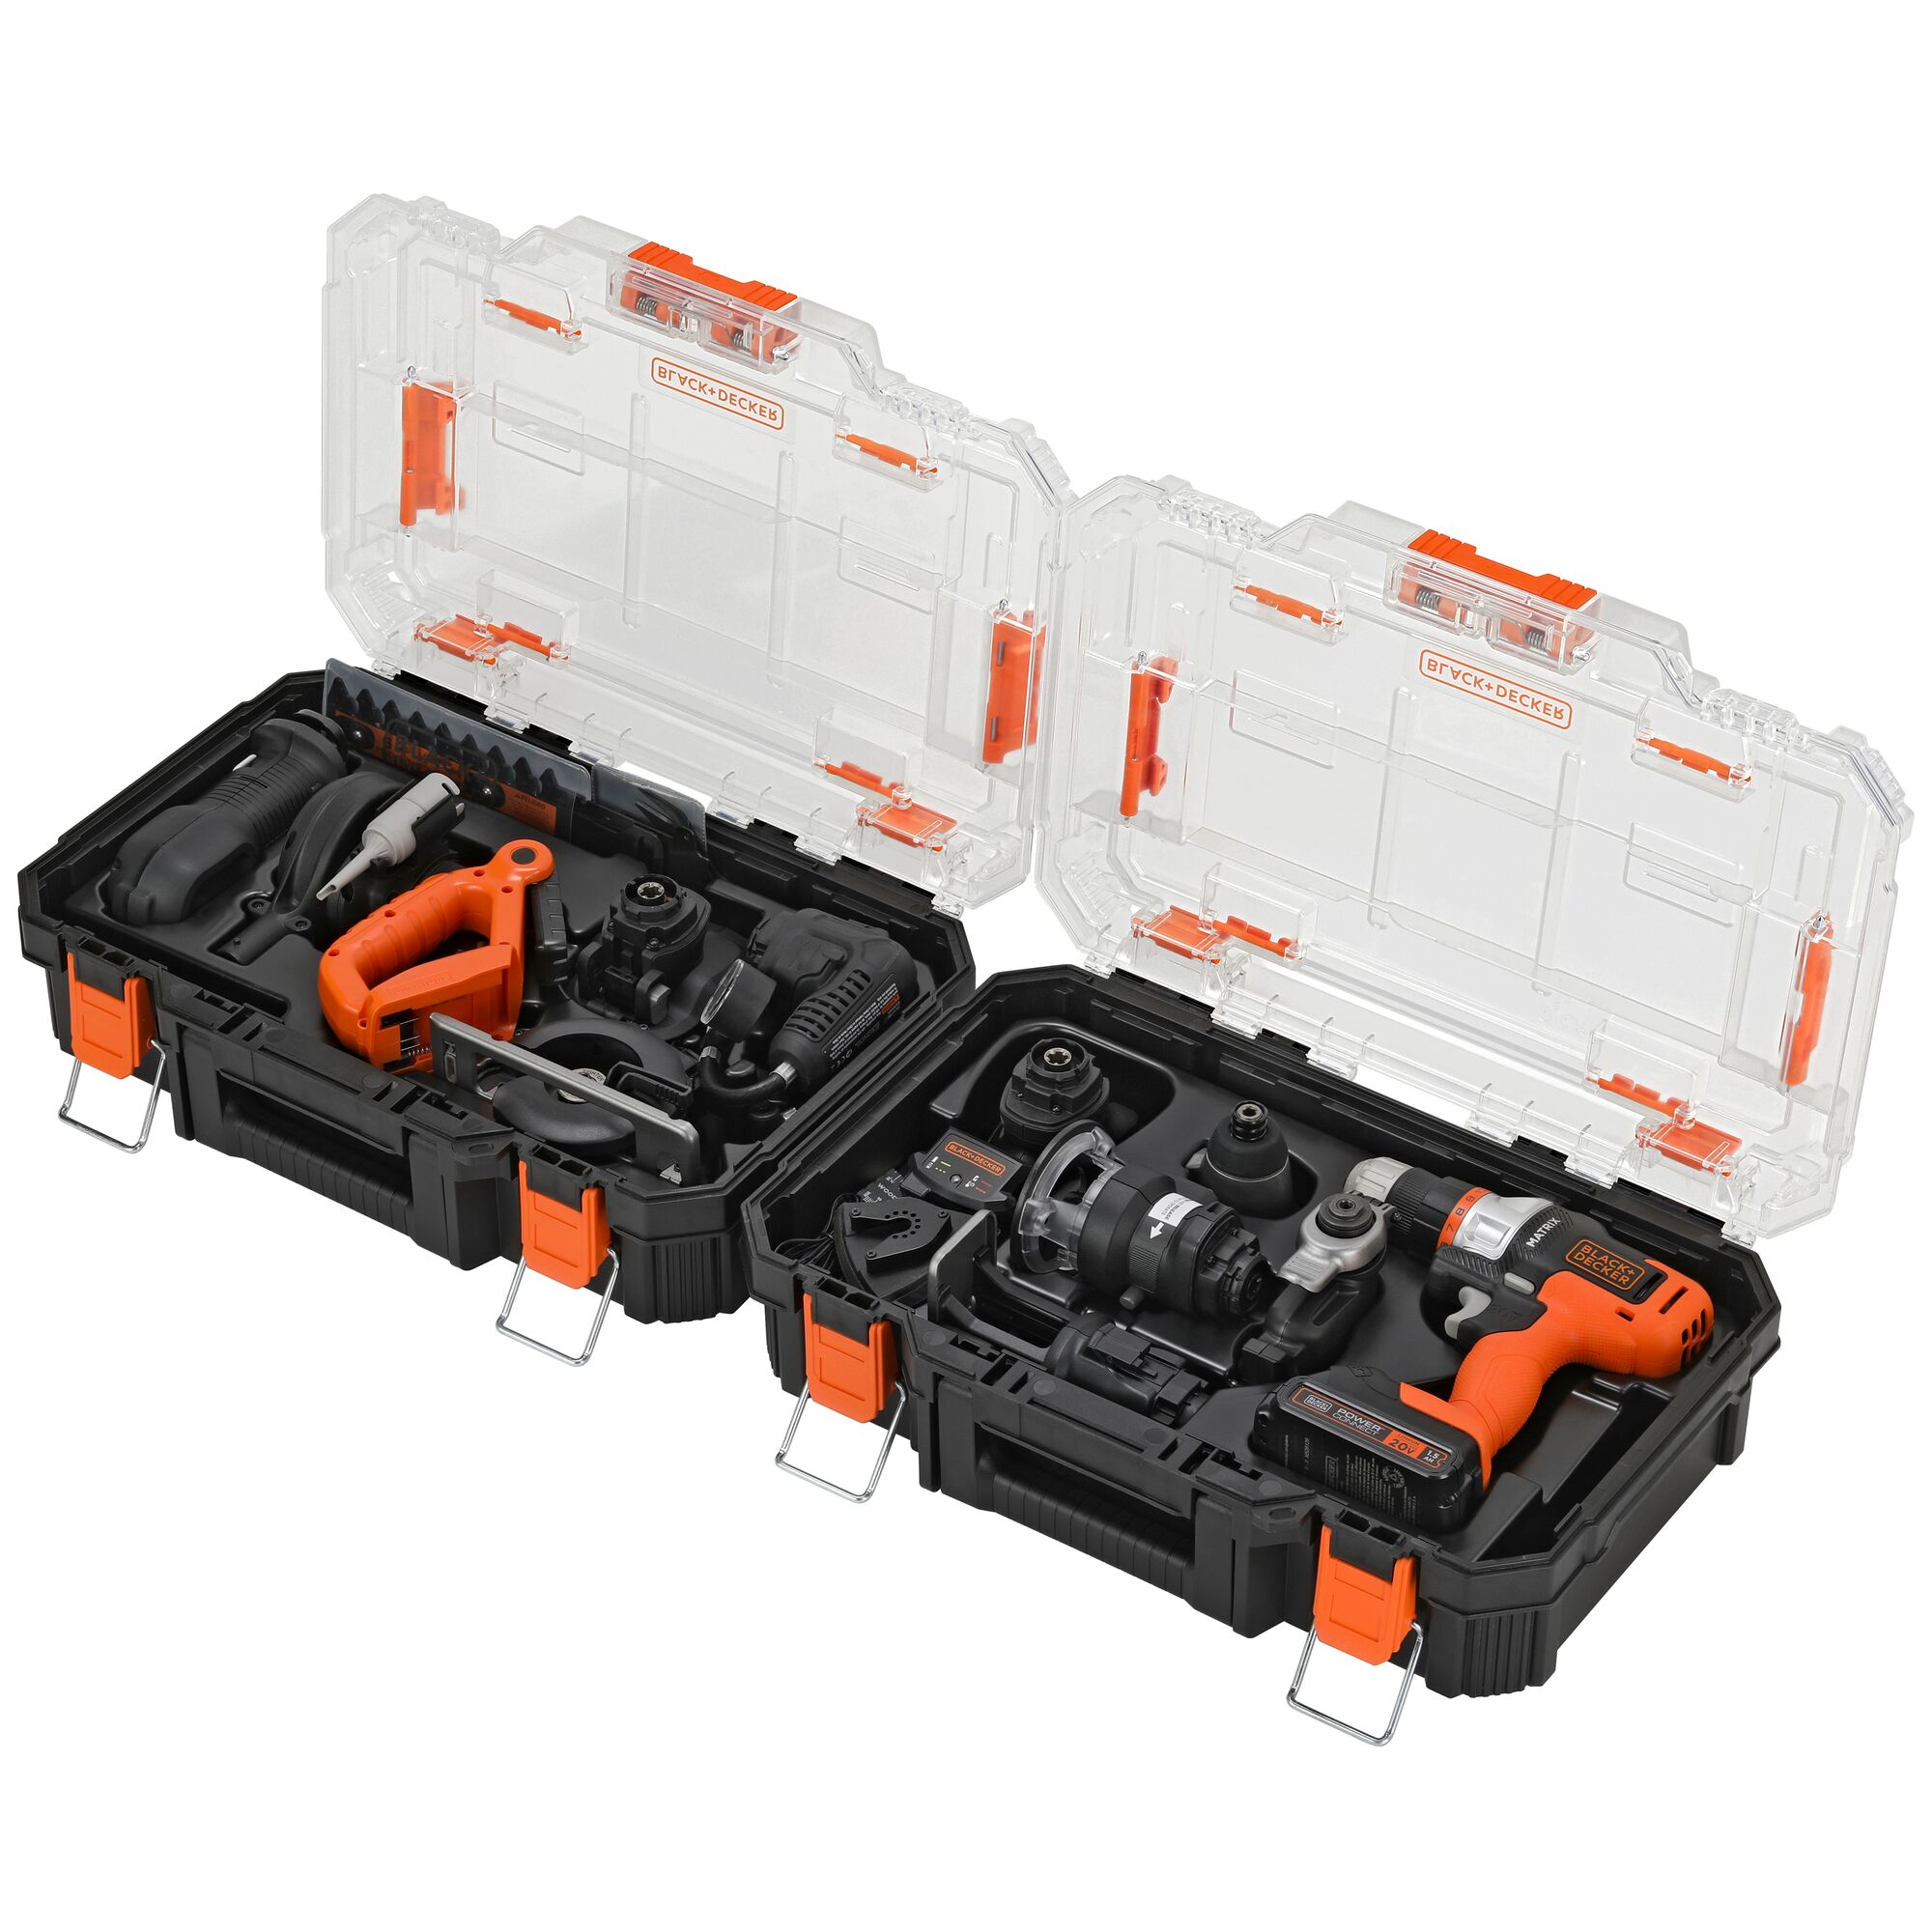 Matrix 20V Max* Power Tool Kit, Includes Cordless Drill, 12 Attachments And  Storage Case